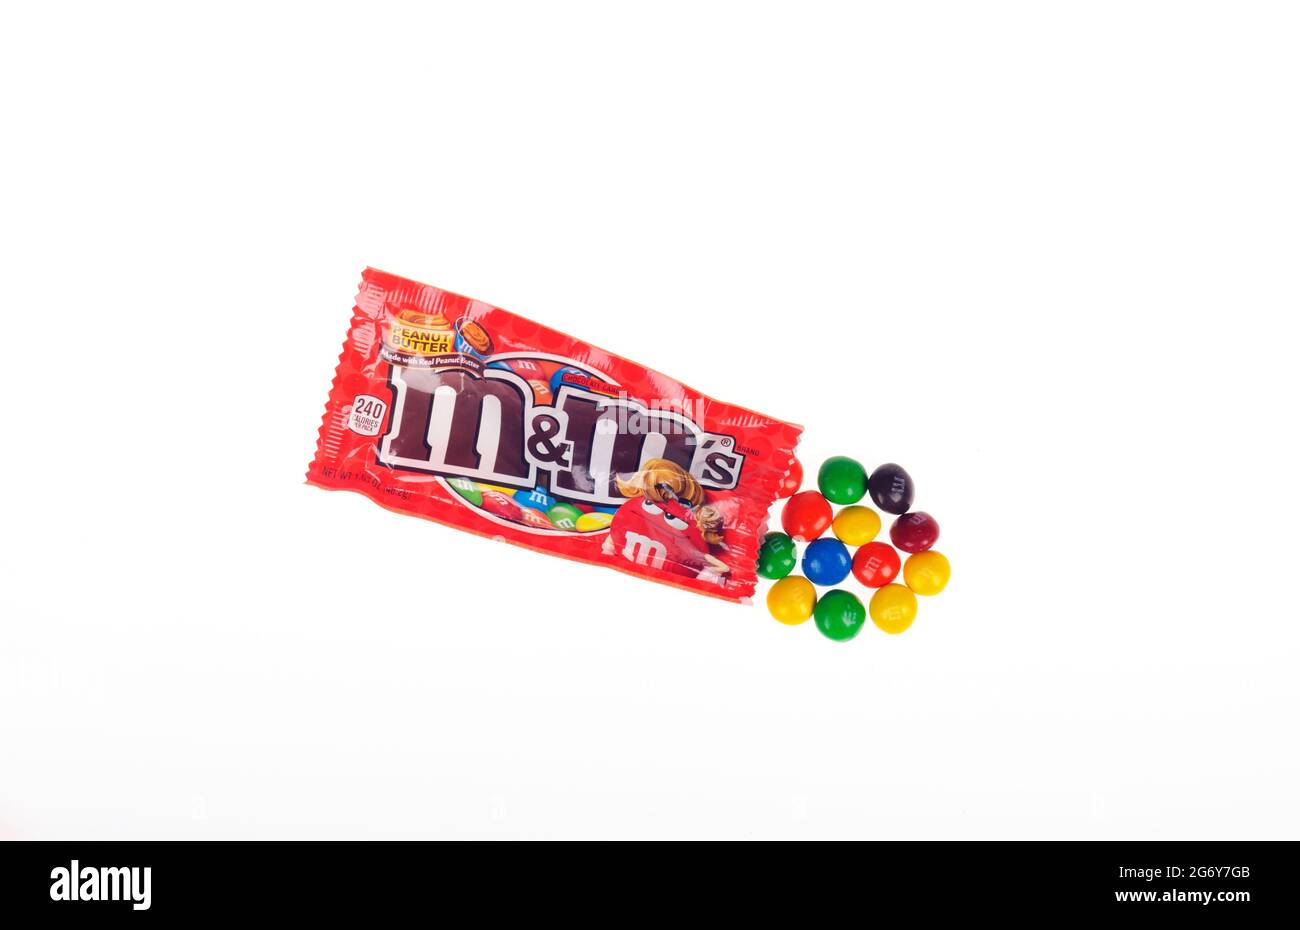 M&M's Peanut Butter Candy Packet Open on White Stock Photo